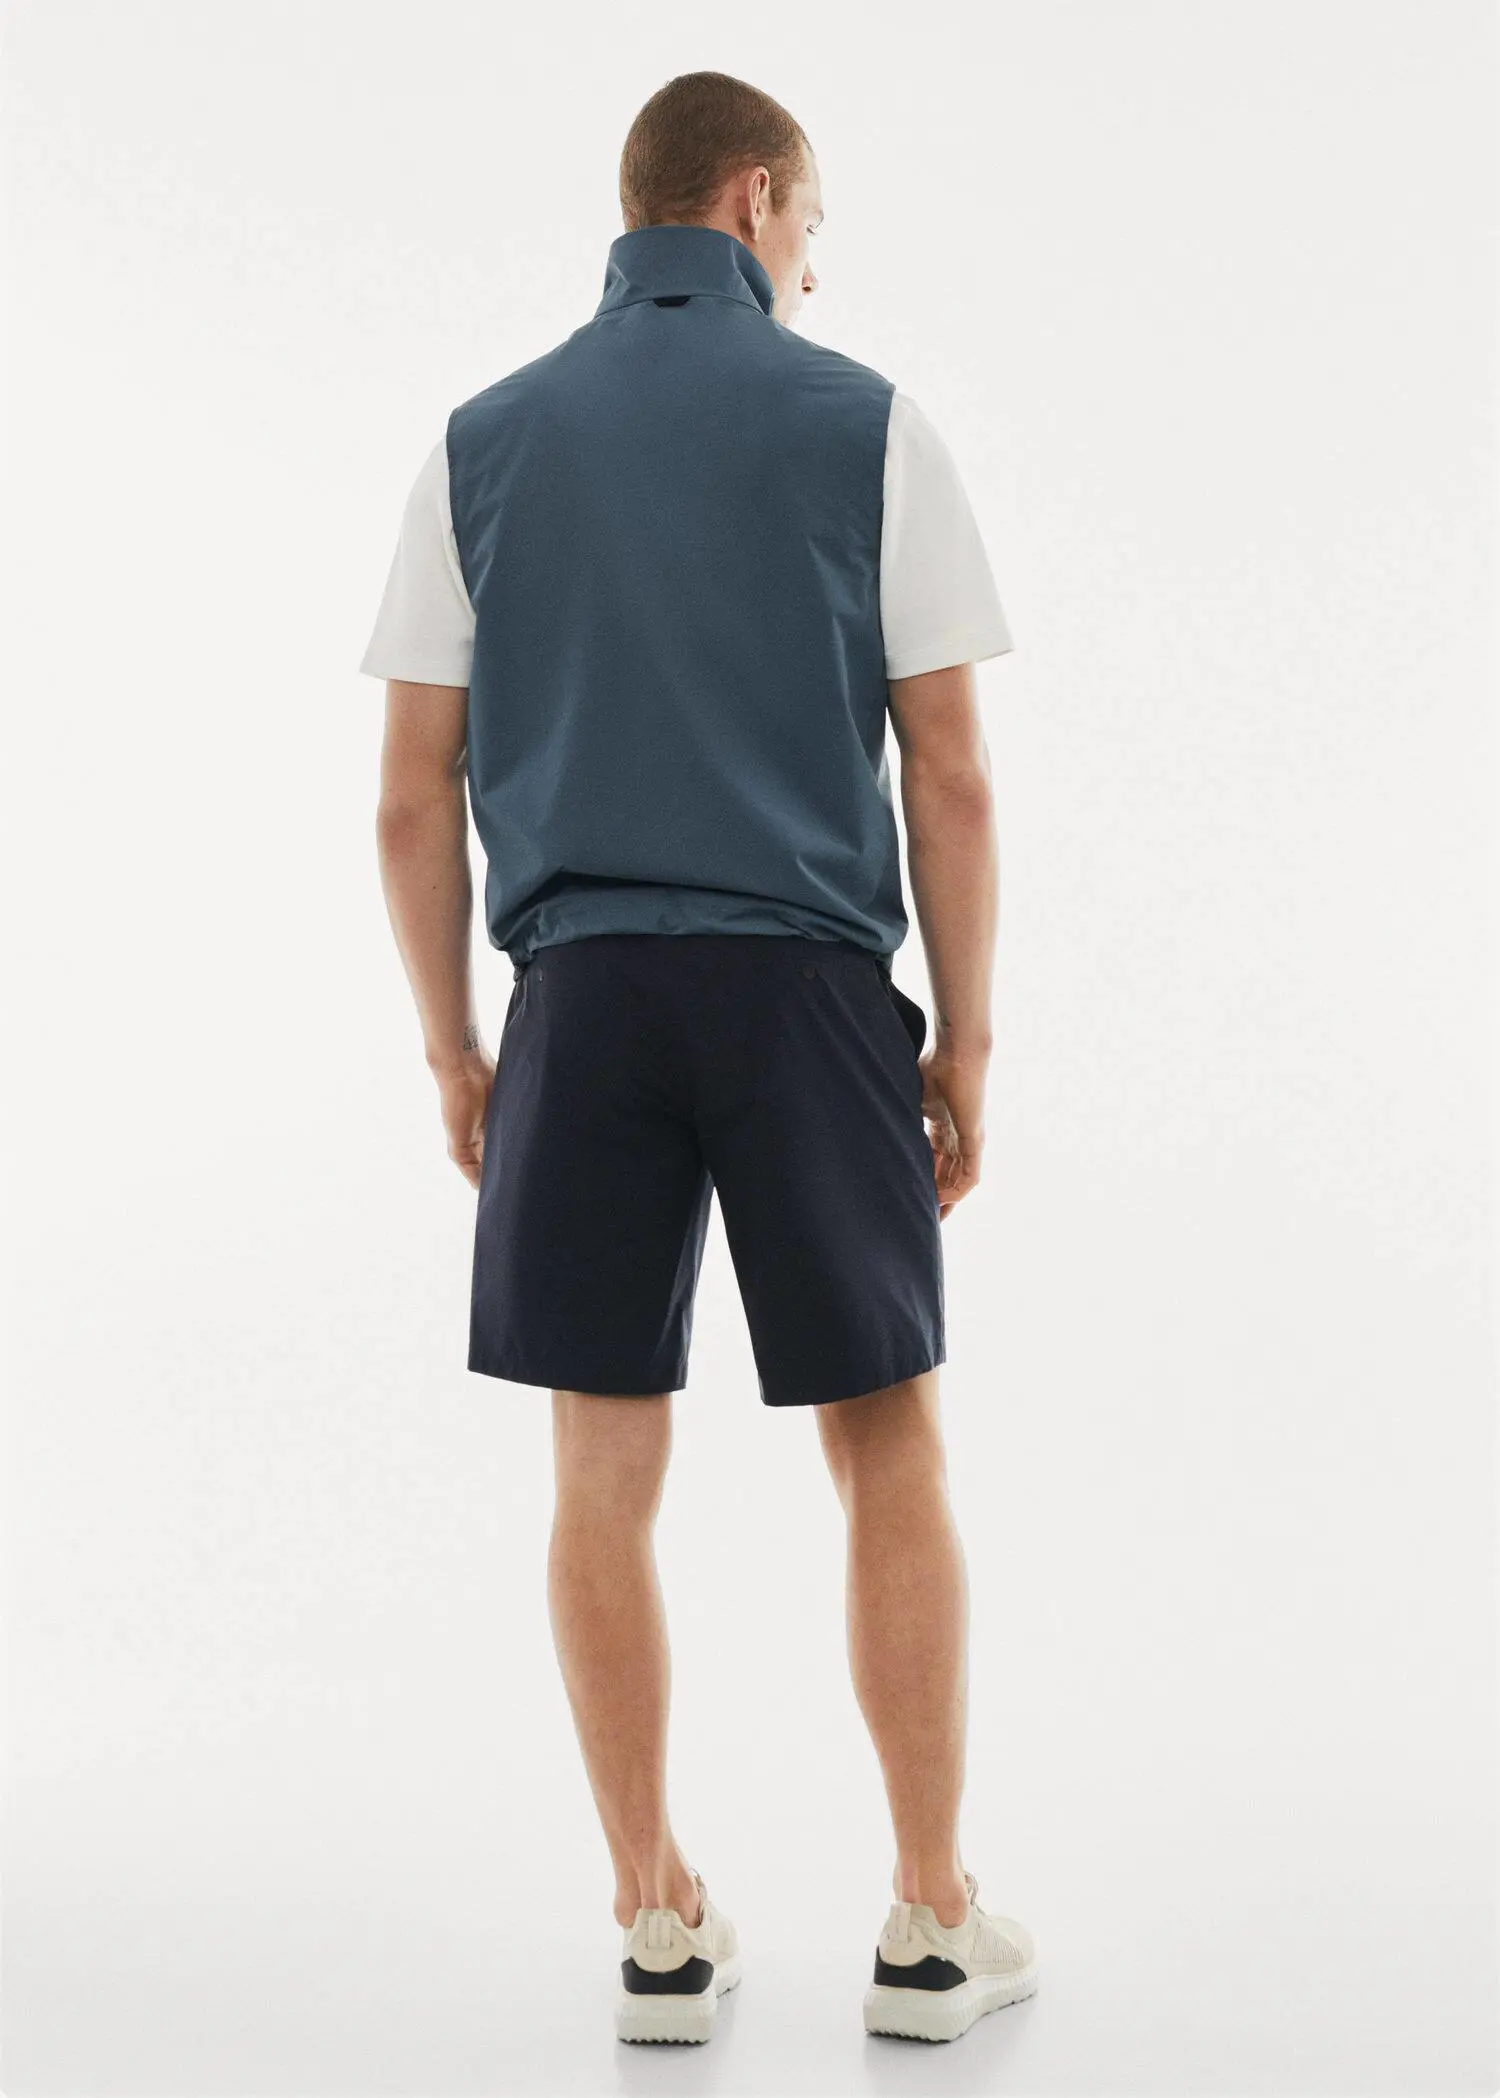 Mango Water-repellent technical vest. a man wearing a blue vest and black shorts. 